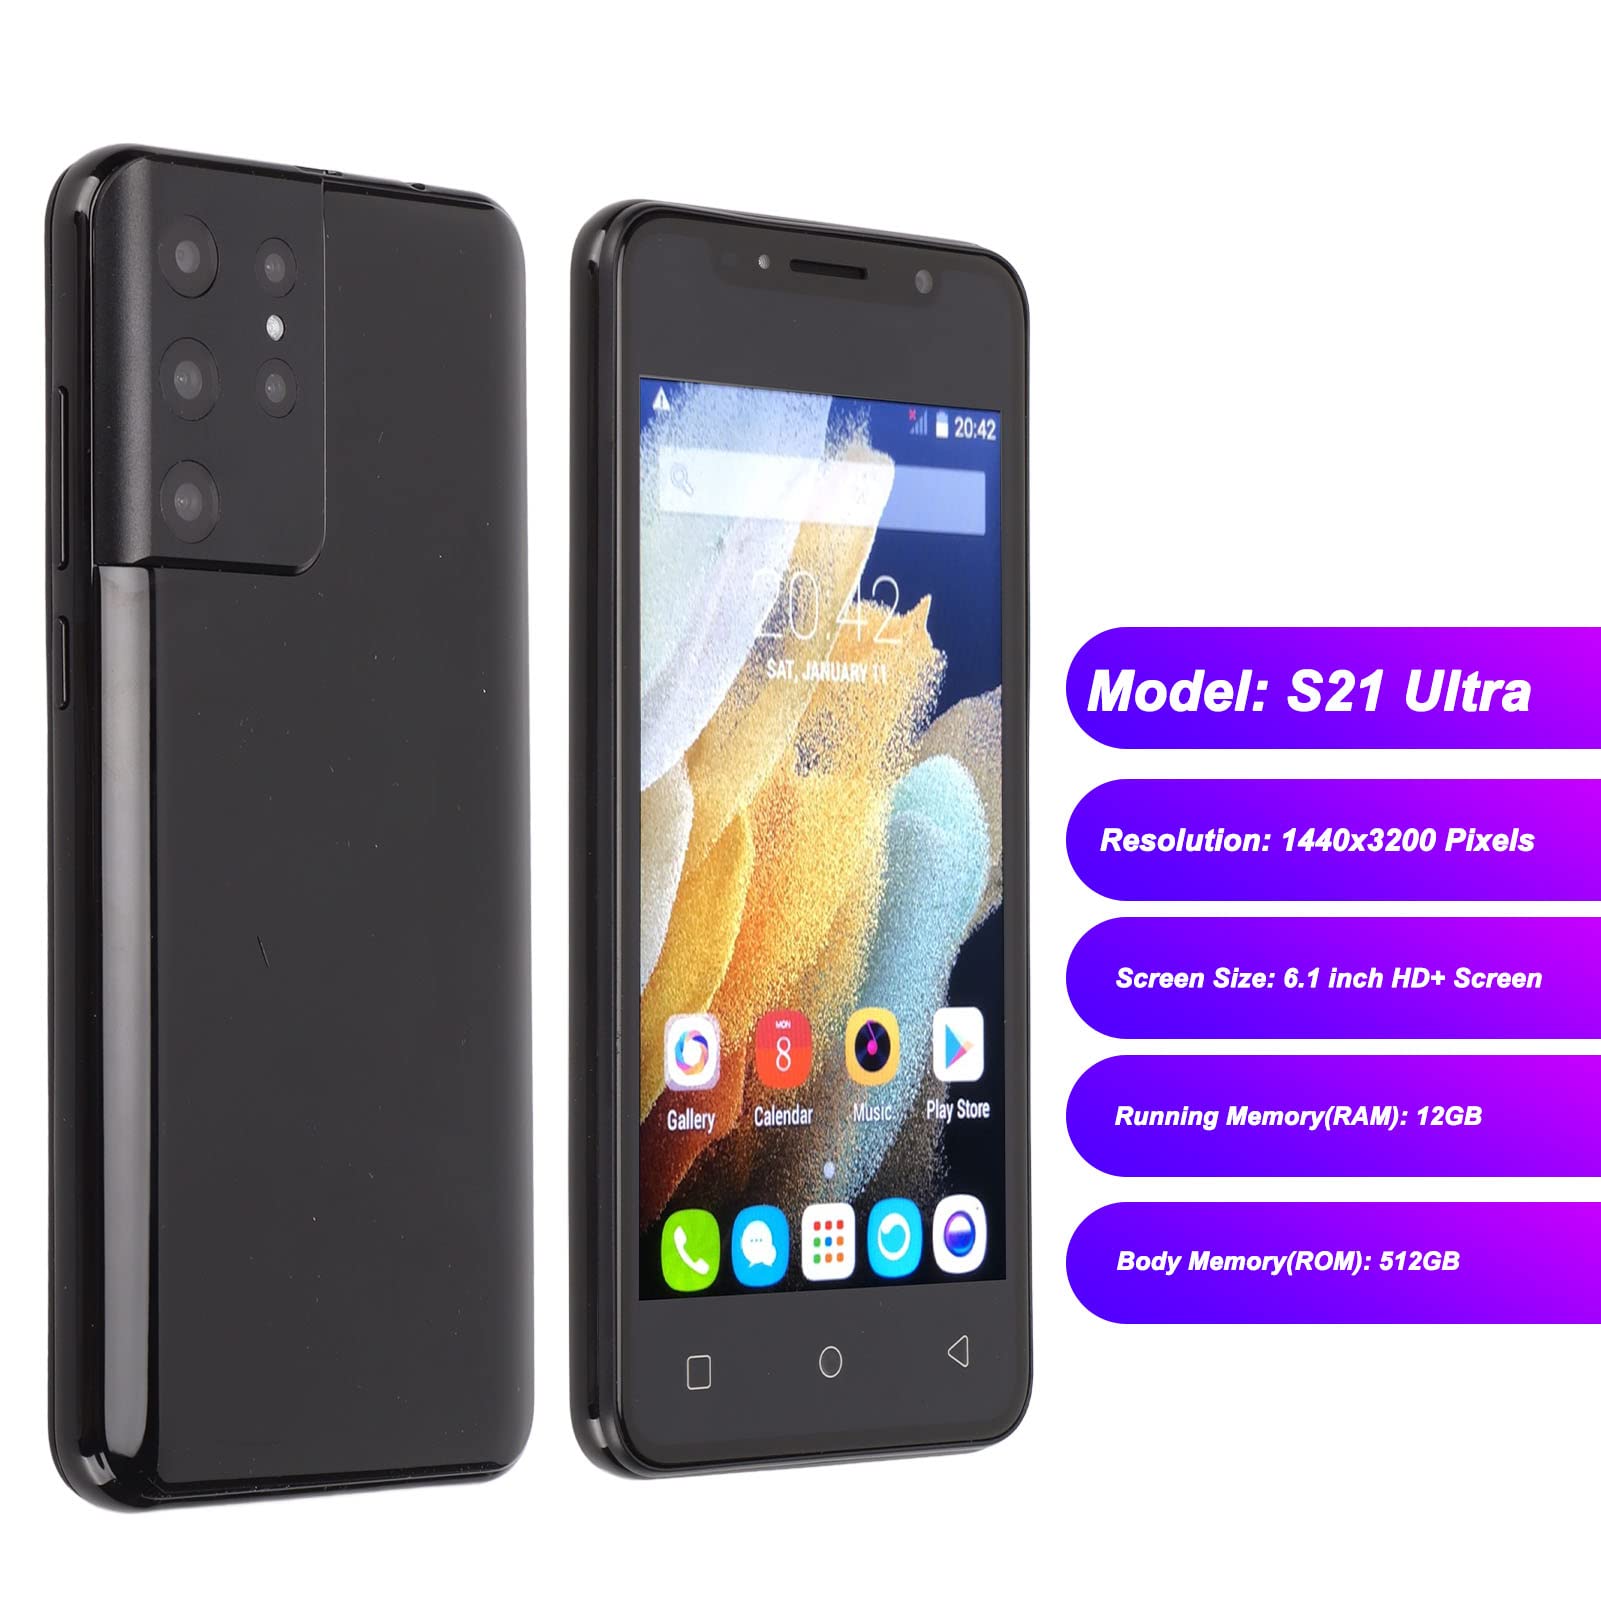 Luqeeg S21 Ultra Smartphone, 6.1In 12GB RAM 512GB ROM Black Smartphone, 24MP and 48MP Dual Camera Mobile Phone, Support Face Recognition, WiFi, BT, GPS, USSB Charging Port for 11